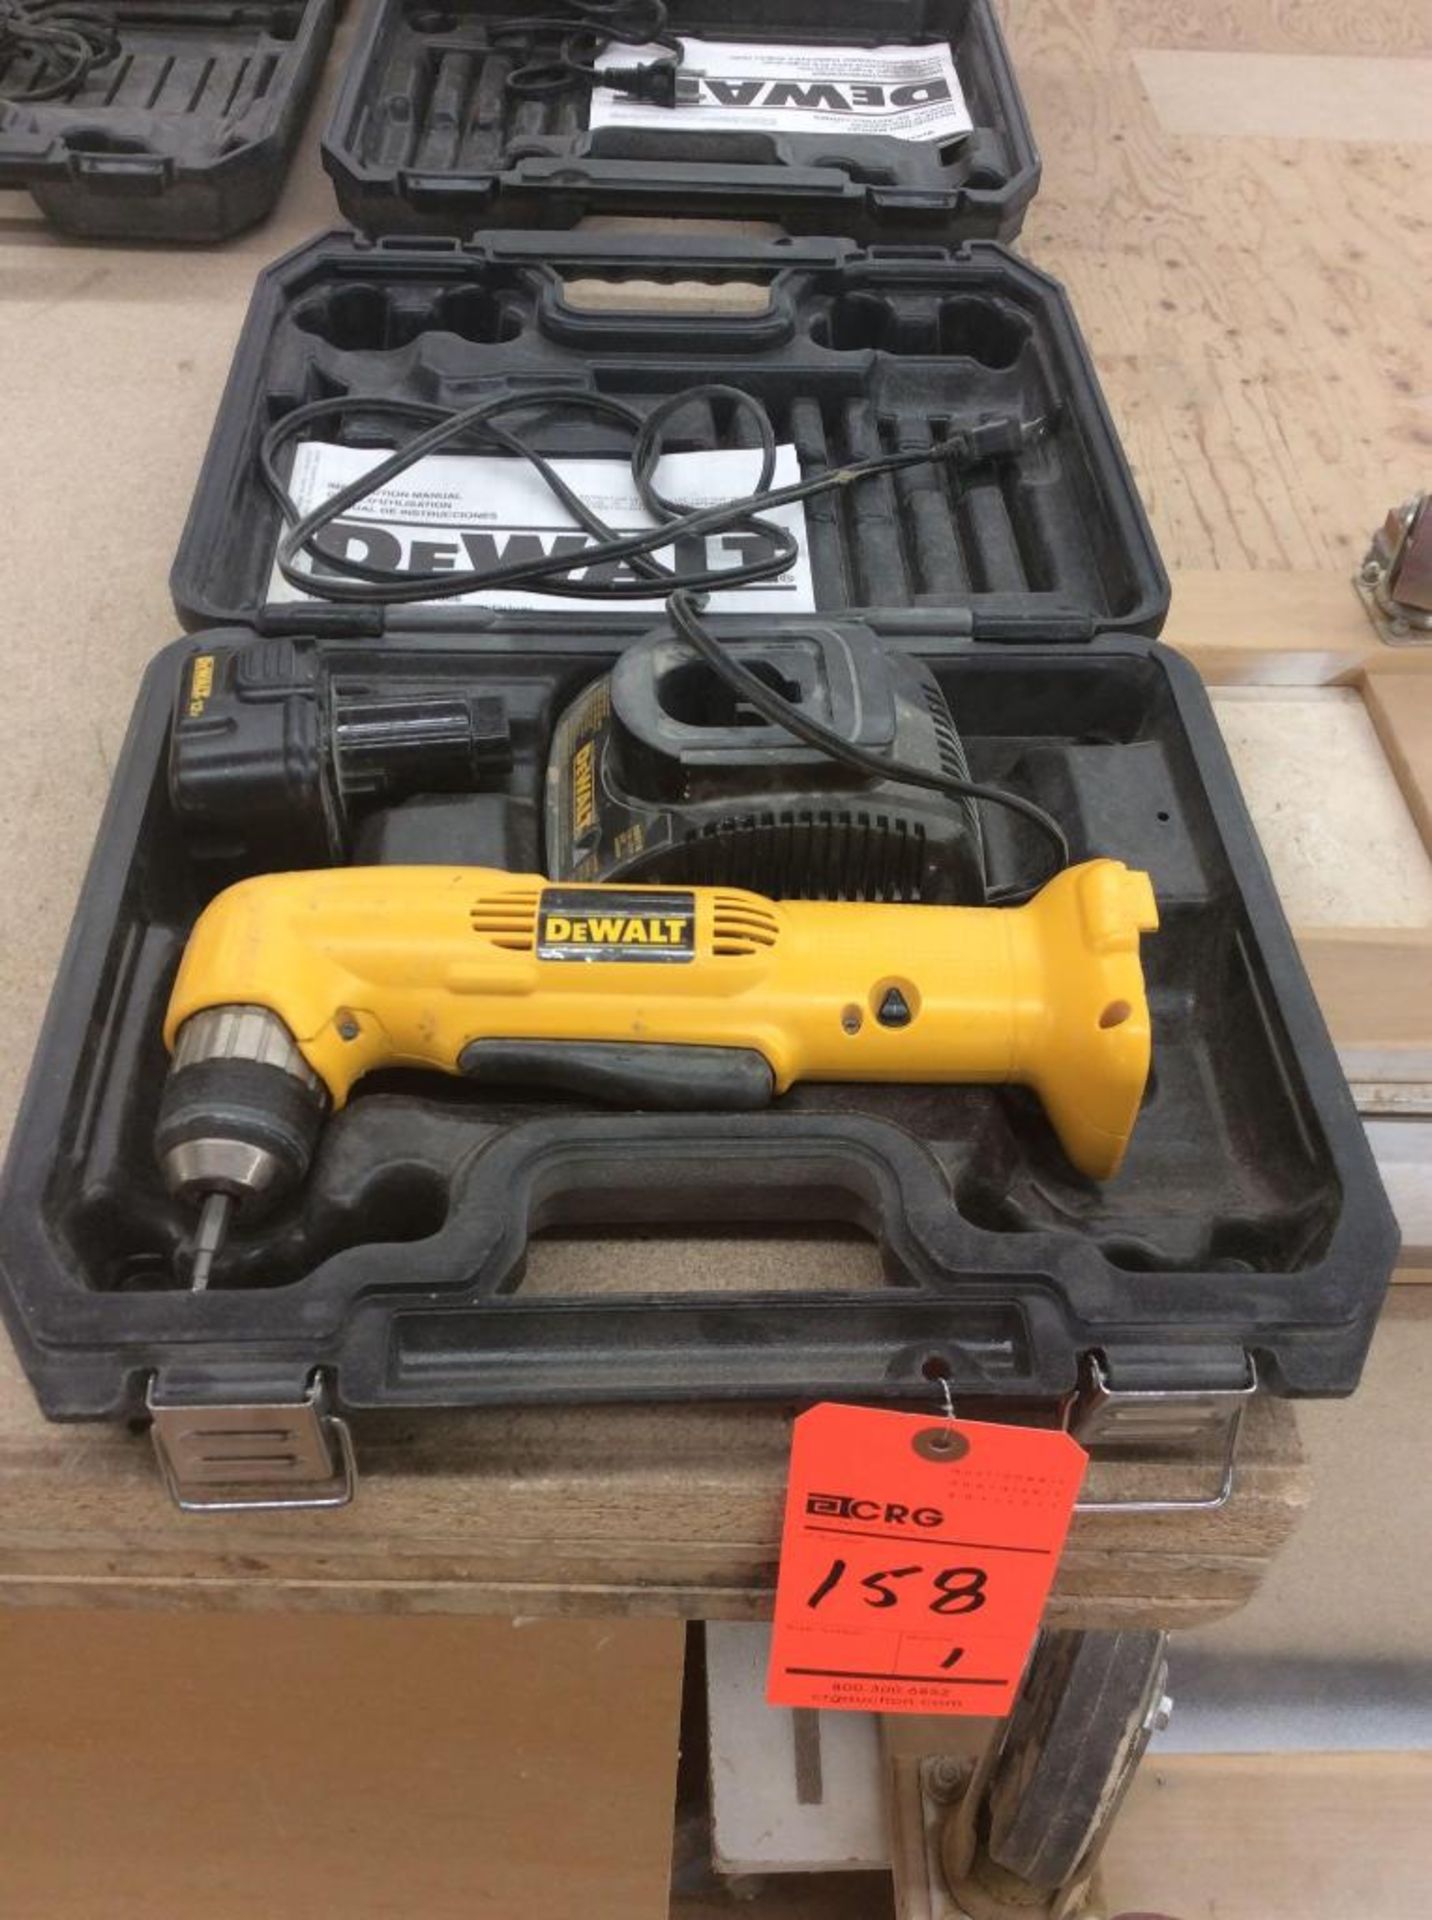 Dewalt 12 volt 3/8" cordless right angle drill mn DW965 with case